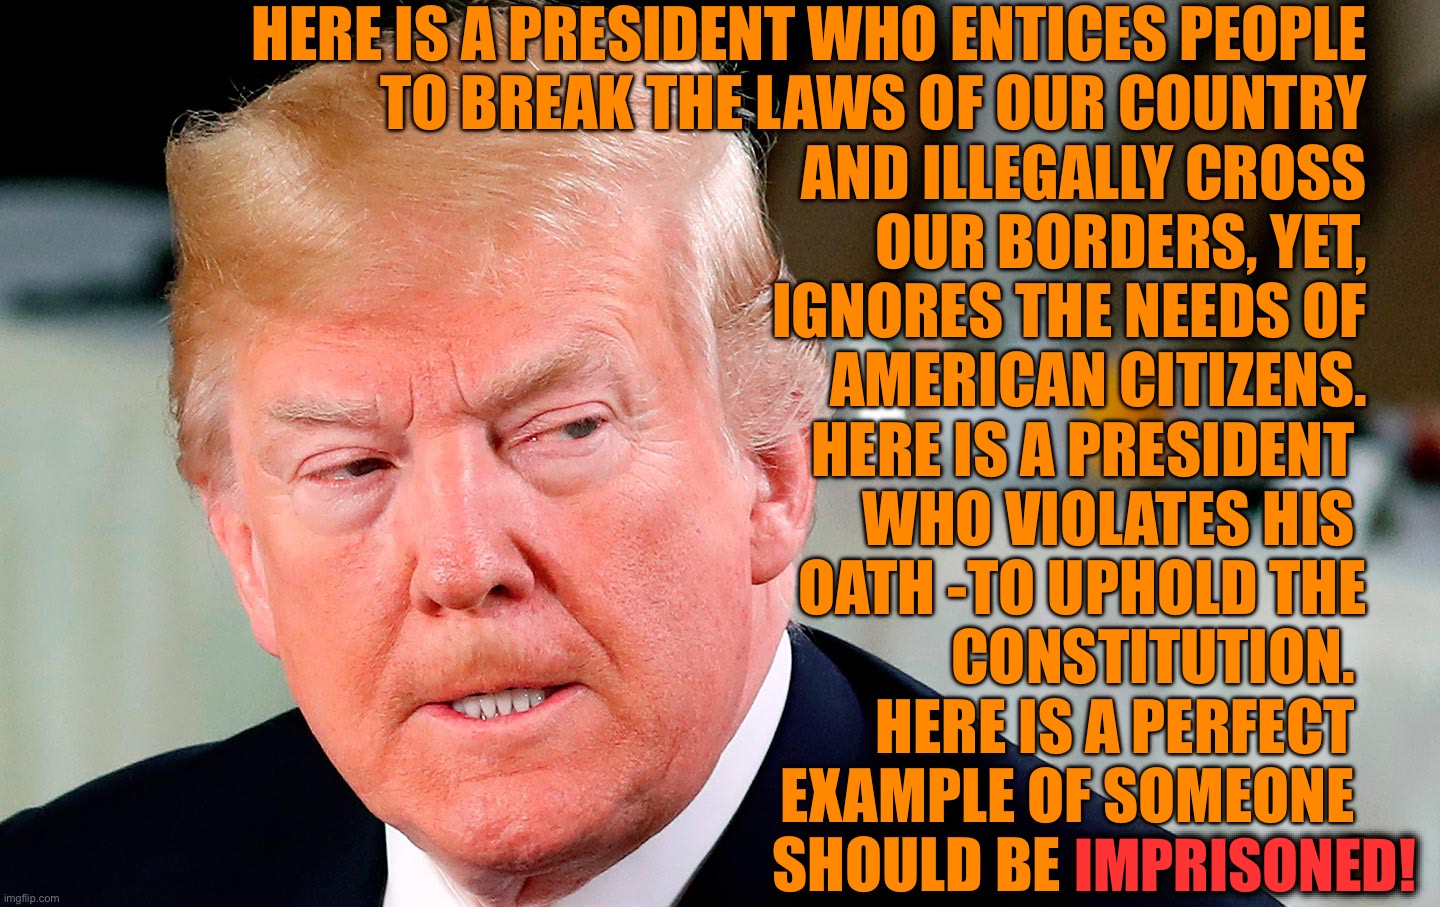 TRUMP FOR PRISON | HERE IS A PRESIDENT WHO ENTICES PEOPLE
TO BREAK THE LAWS OF OUR COUNTRY
AND ILLEGALLY CROSS
OUR BORDERS, YET,
IGNORES THE NEEDS OF
AMERICAN CITIZENS.
HERE IS A PRESIDENT 
WHO VIOLATES HIS 
OATH -TO UPHOLD THE
CONSTITUTION. 
HERE IS A PERFECT 
EXAMPLE OF SOMEONE 
SHOULD BE                        ! IMPRISONED! | image tagged in trump,prison,traitor,insurrection,imprison,criminal | made w/ Imgflip meme maker